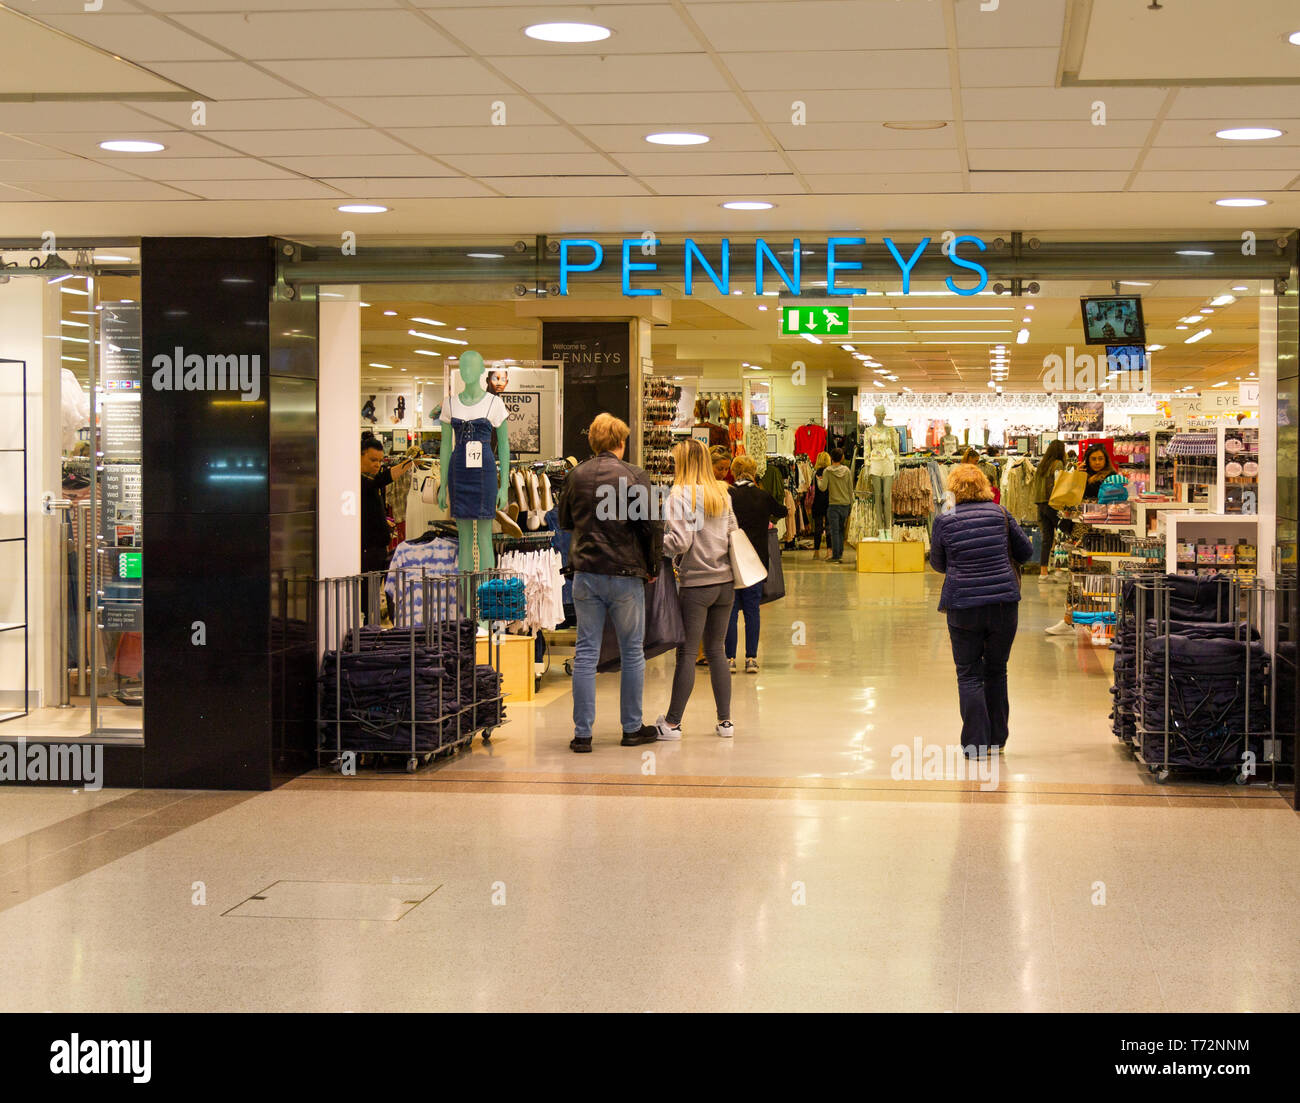 Penneys retail store entrance in a shopping mall Stock Photo